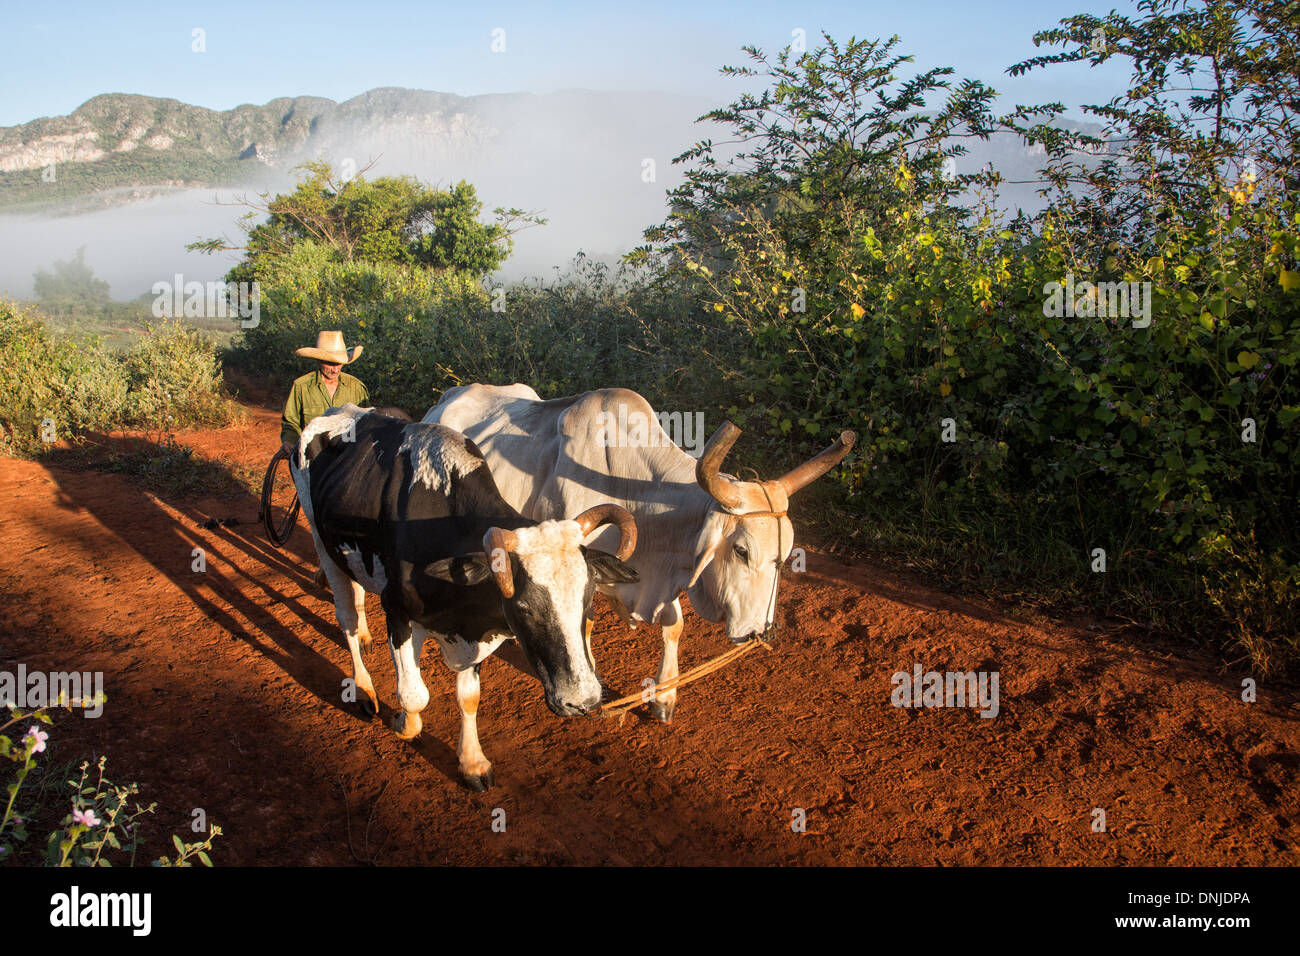 CUBAN FARMER WITH HIS HARNESSED OXEN FOR WORKING THE FIELDS, FARMING LANDSCAPE AT THE FOOT OF THE MOGOTES (MOUNTAINOUS LIMESTONE HILLOCKS), VINALES VALLEY, LISTED AS A WORLD HERITAGE SITE BY UNESCO, CUBA, THE CARIBBEAN Stock Photo